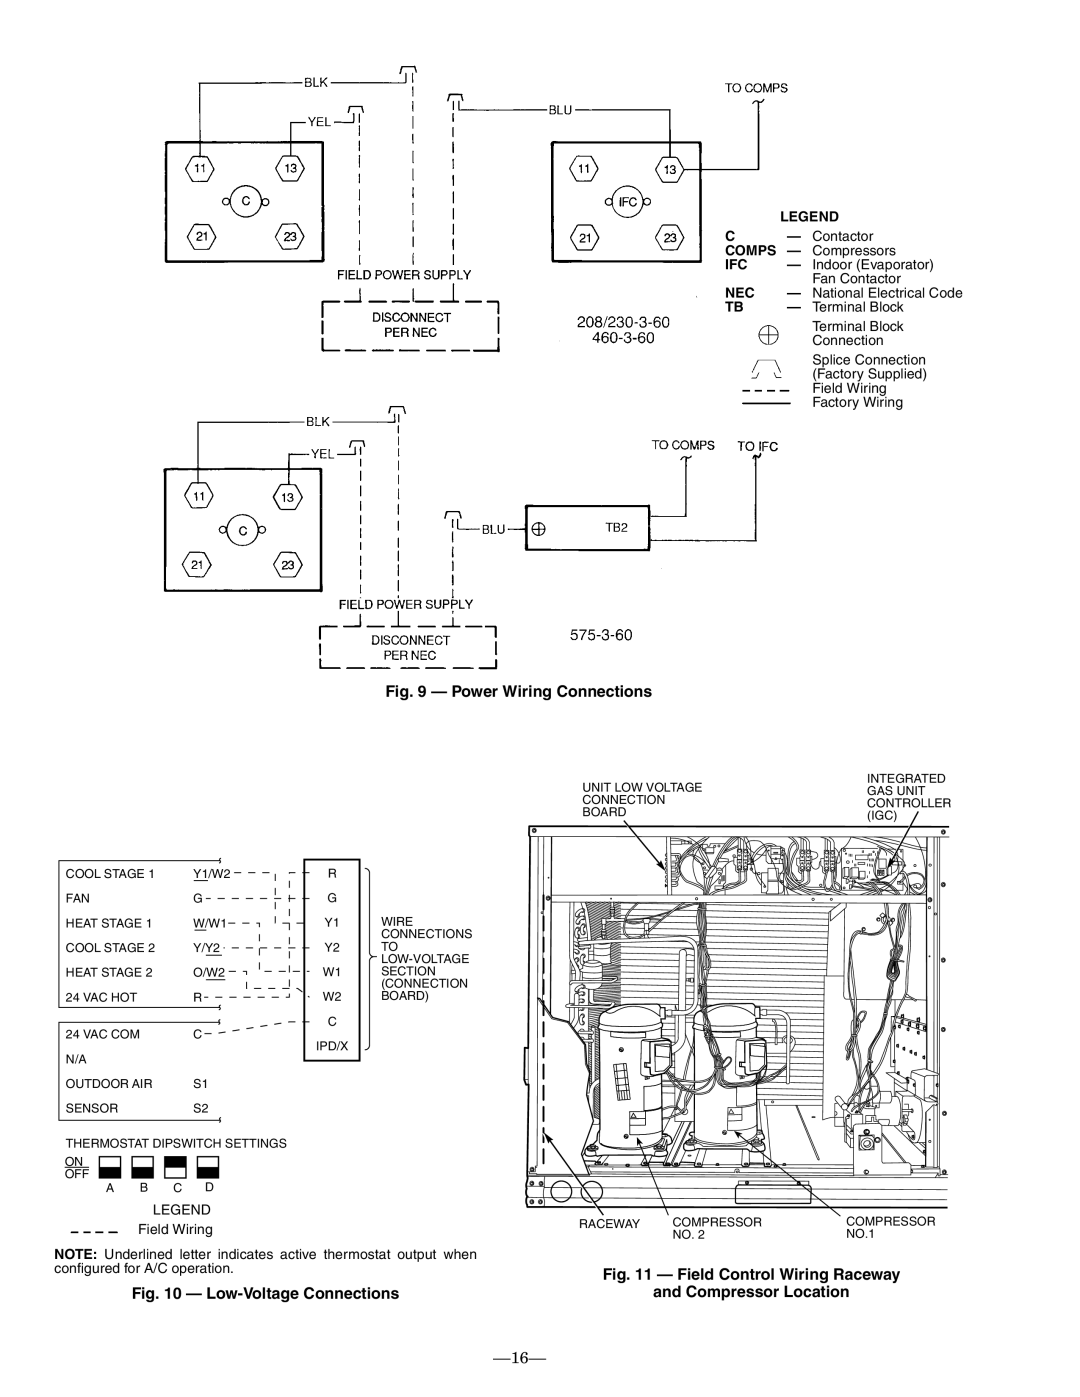 Bryant 580F 16, Power Wiring Connections, Low-VoltageConnections, Field Control Wiring Raceway, and Compressor Location 